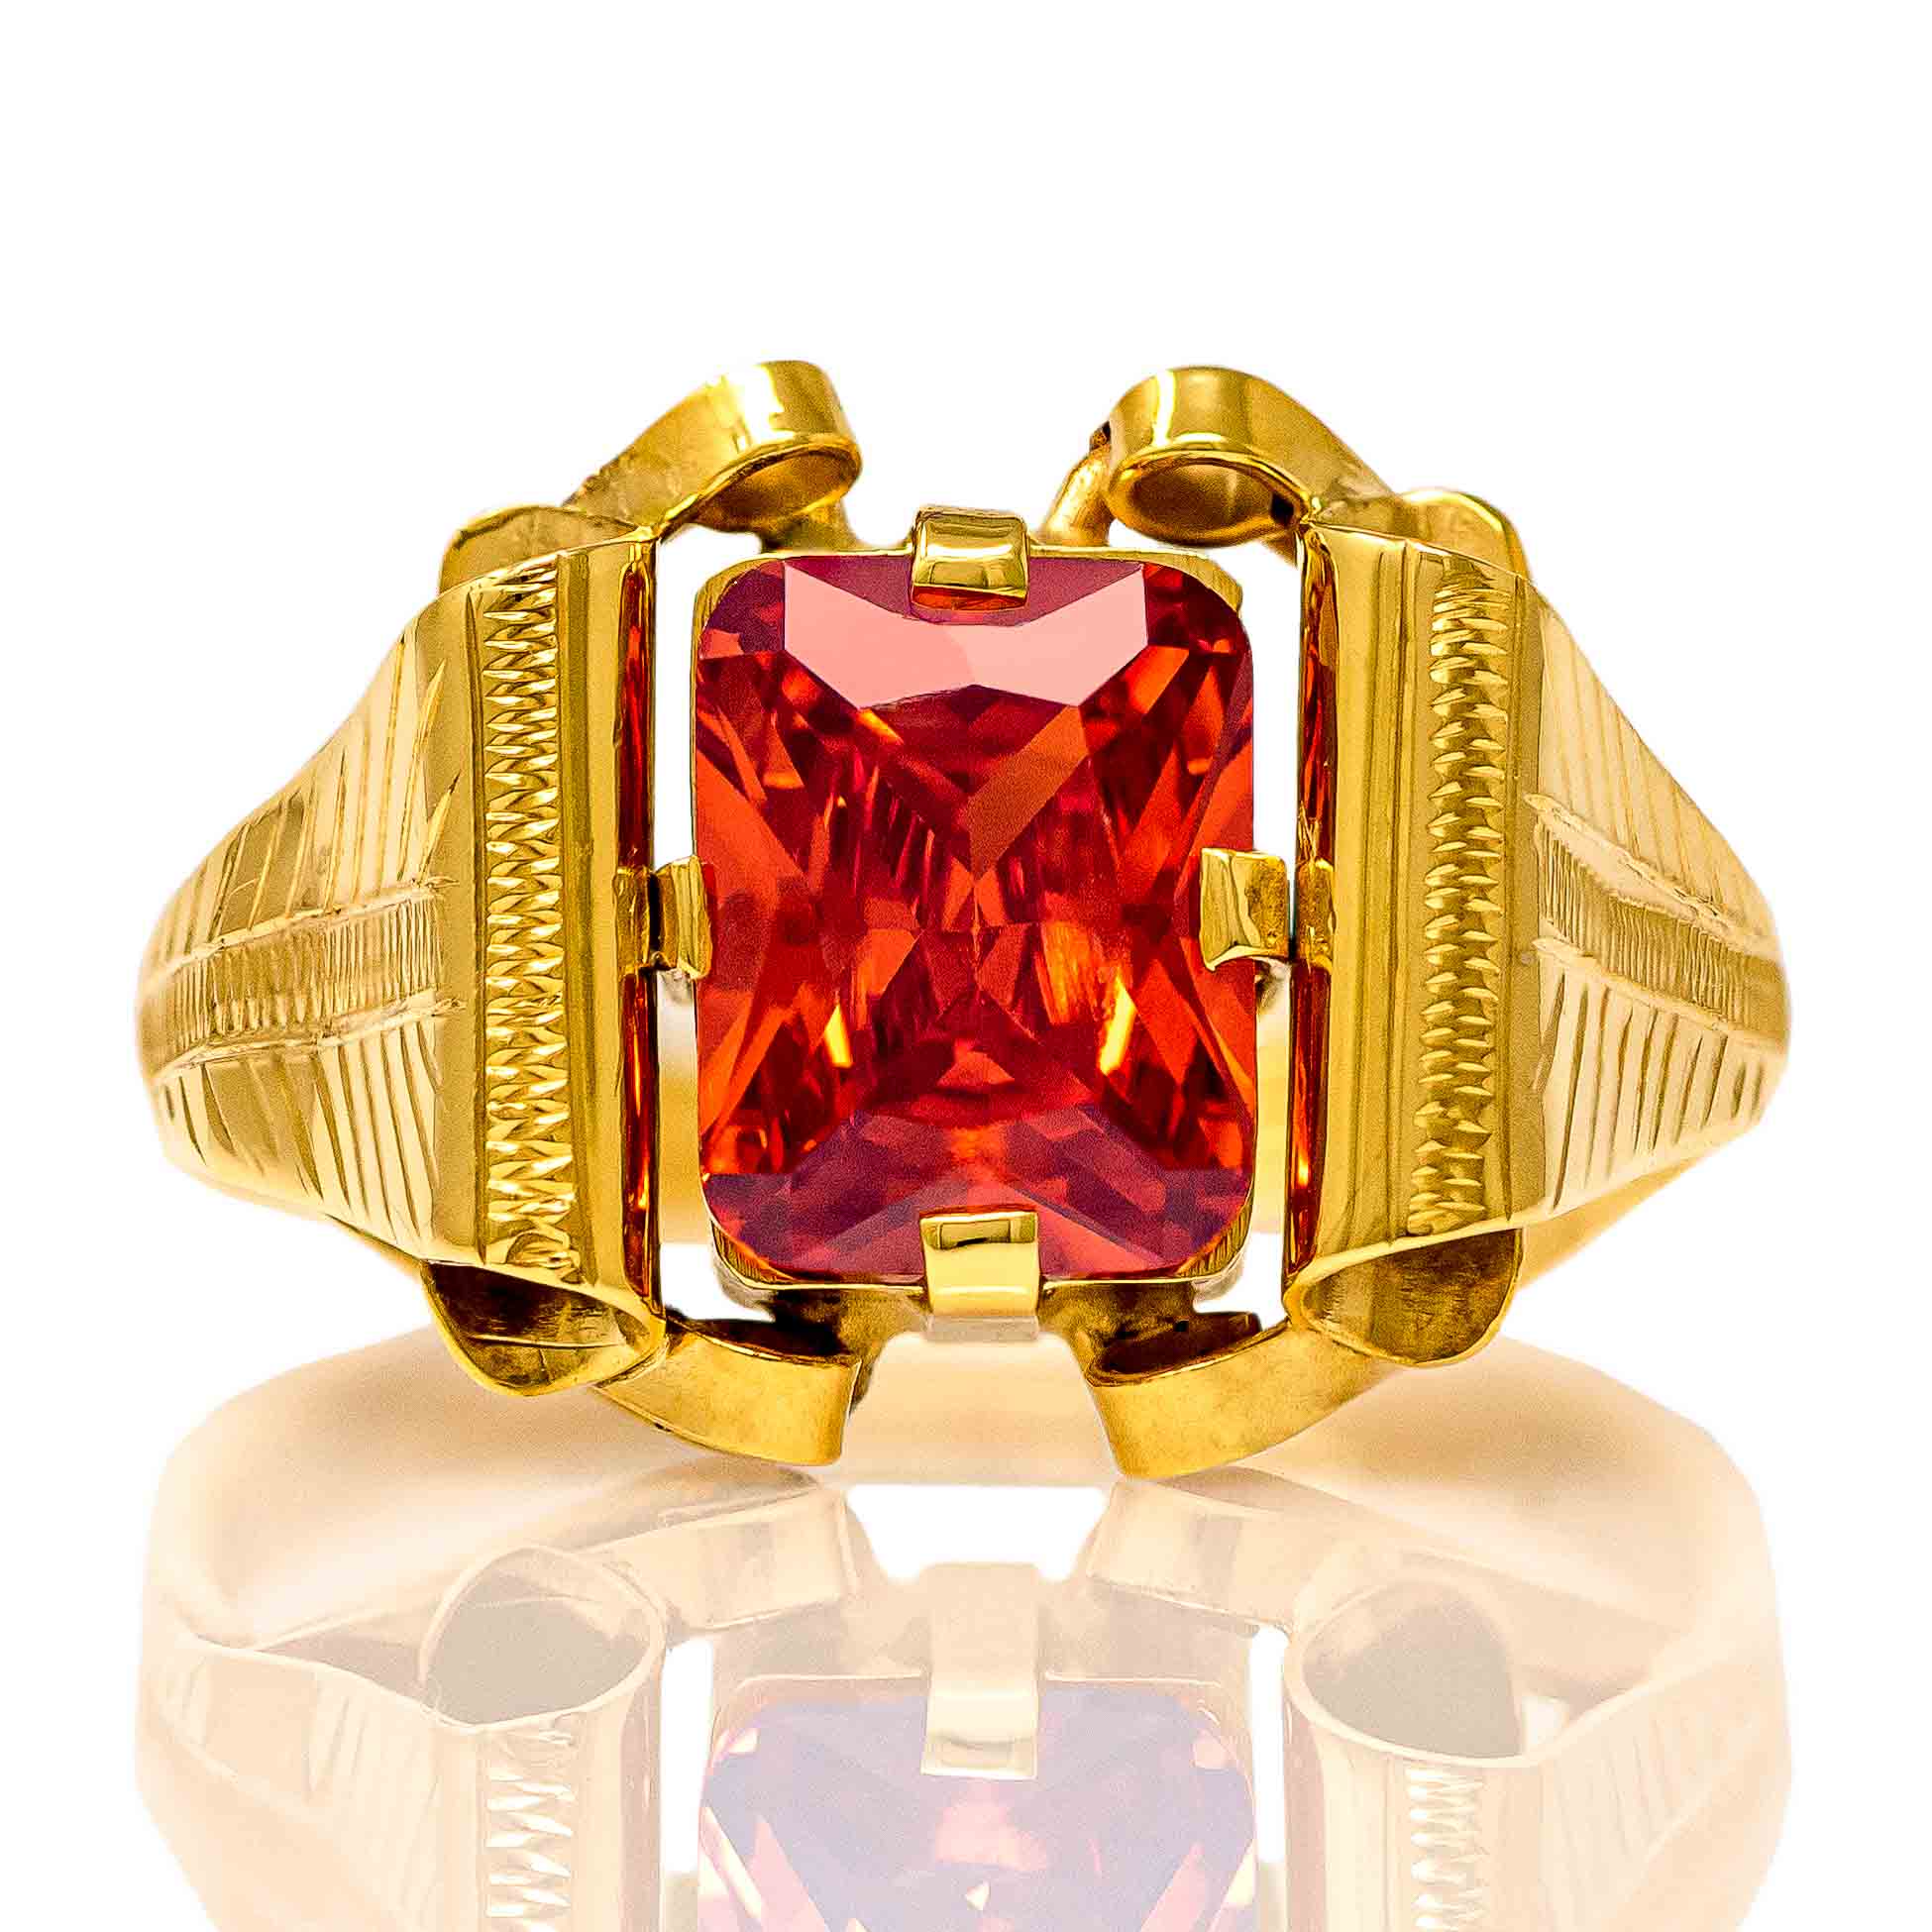 Handmade Yellow Gold 9kt Ring with Synthetic Garnet